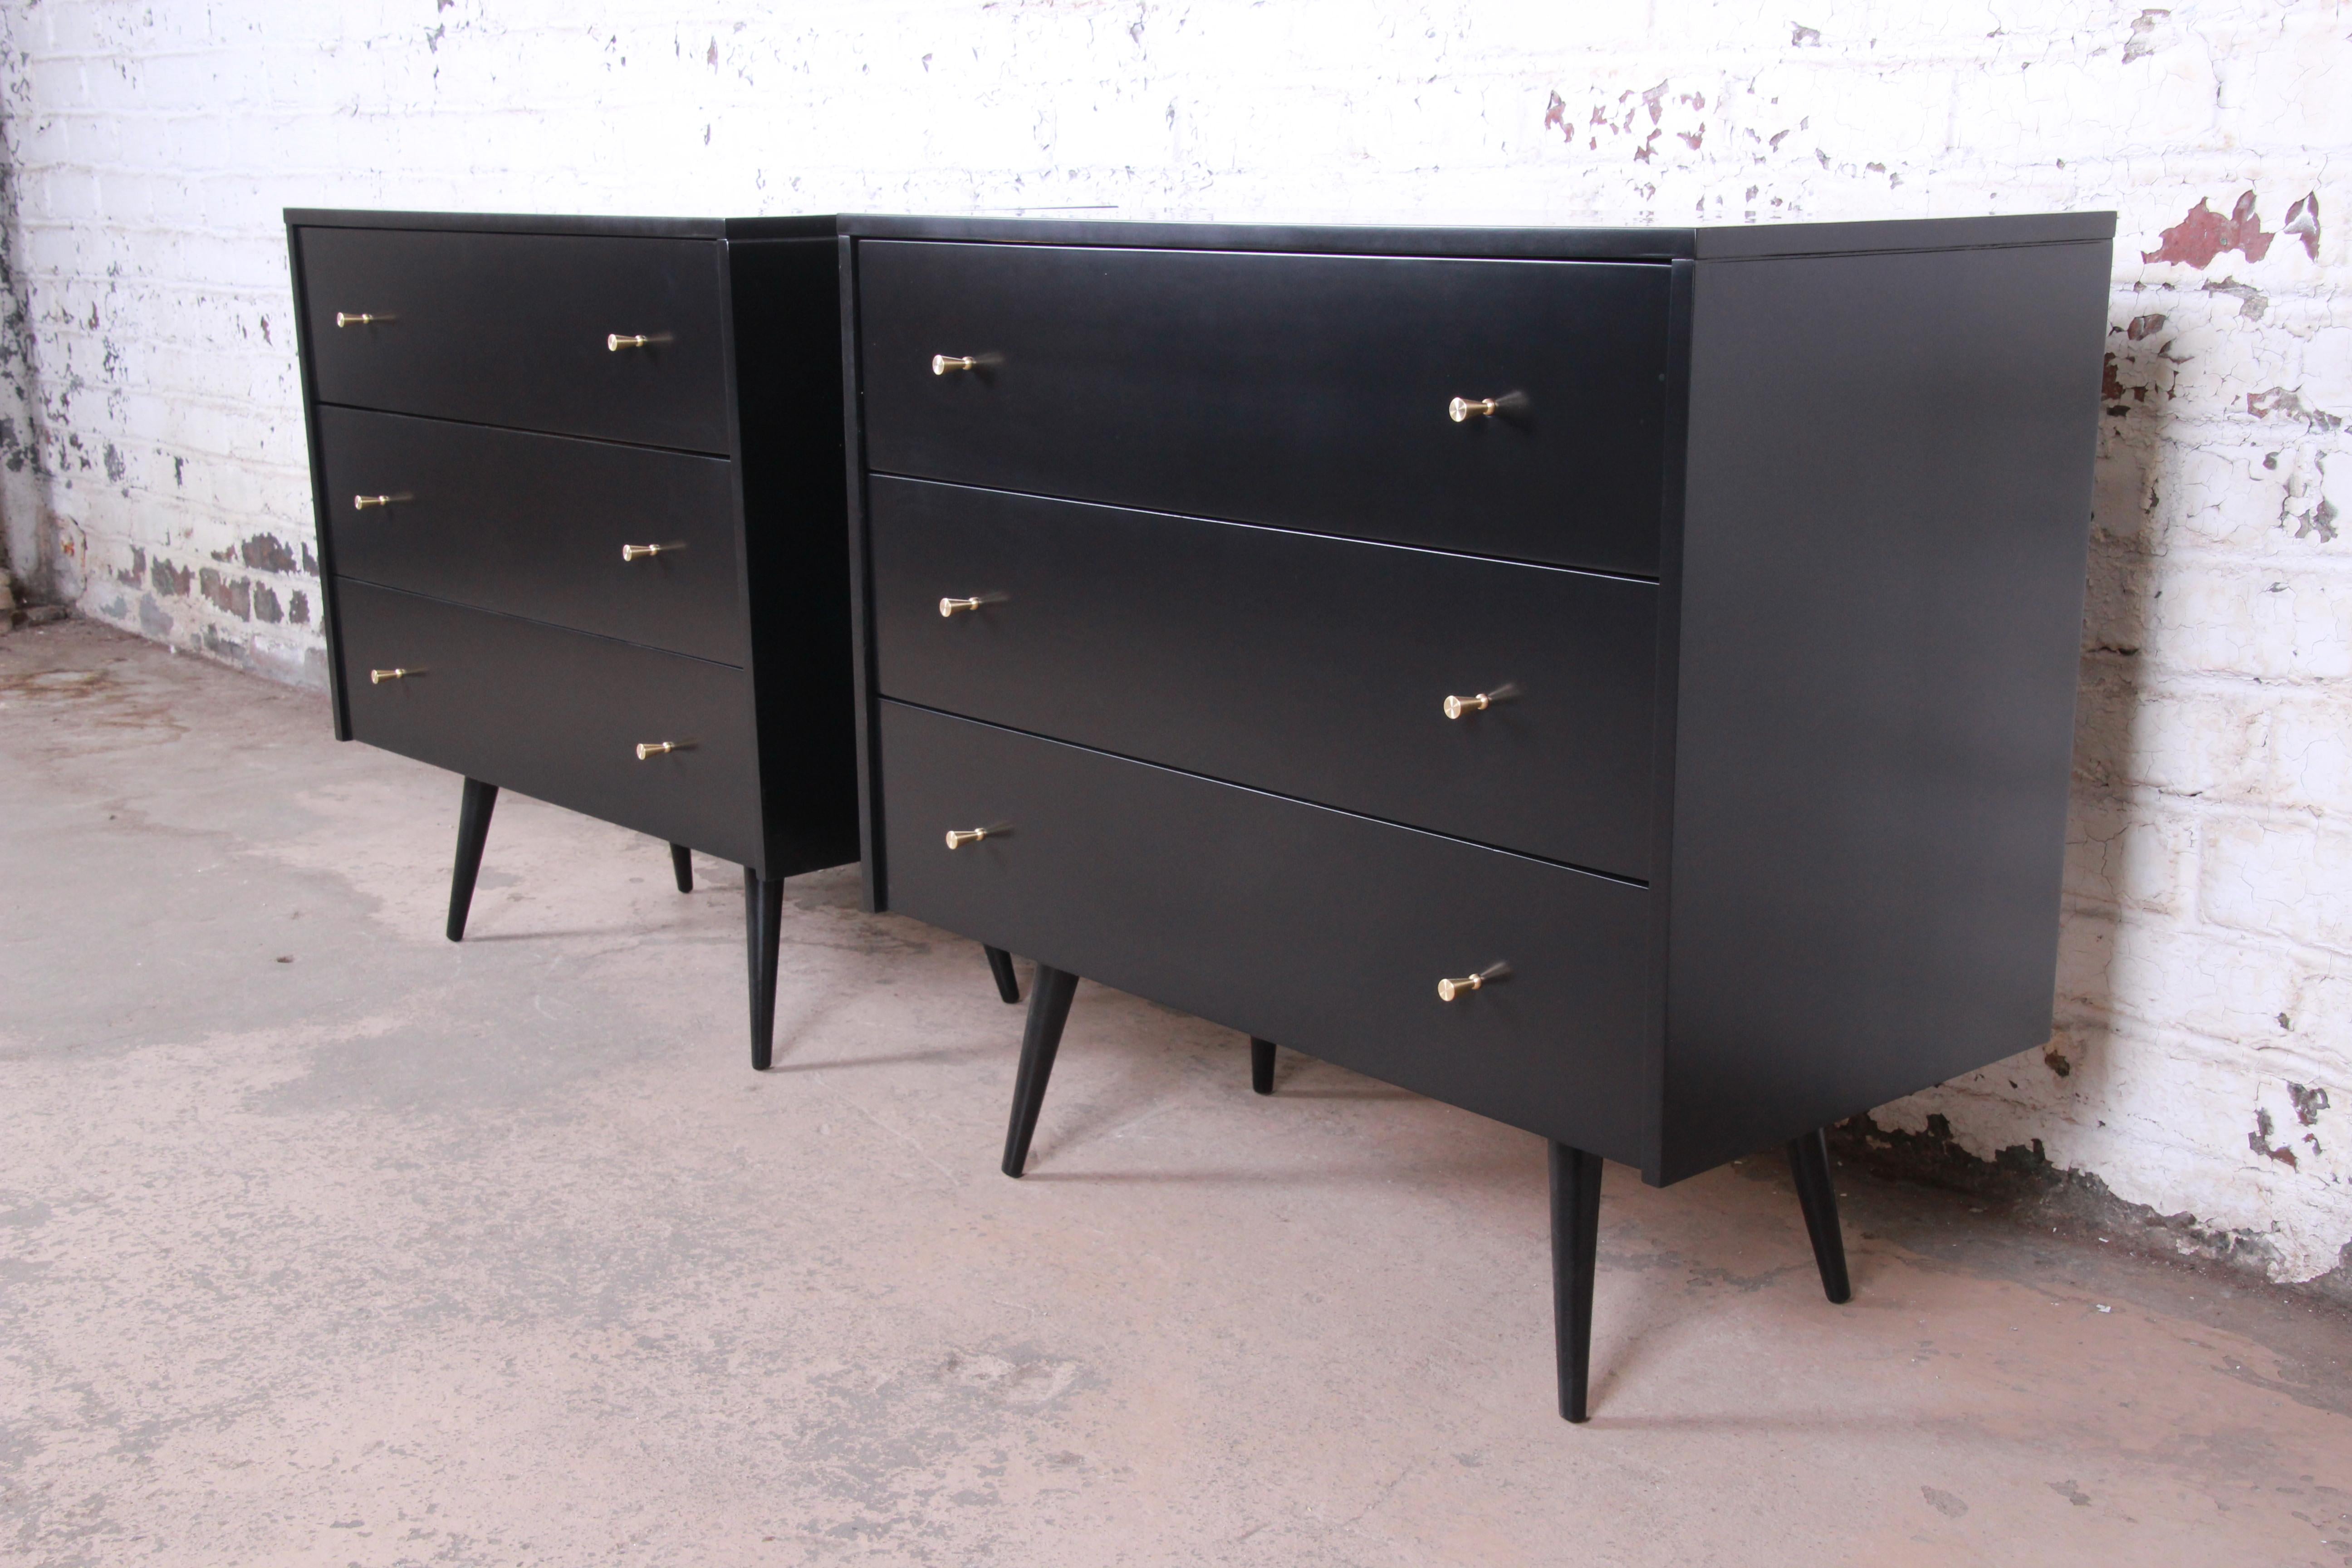 An outstanding pair of Mid-Century Modern bachelor chests or large nightstands designed by Paul McCobb for his planner group line for Winchendon Furniture. The chests feature solid maple construction with a beautiful black lacquered finish and